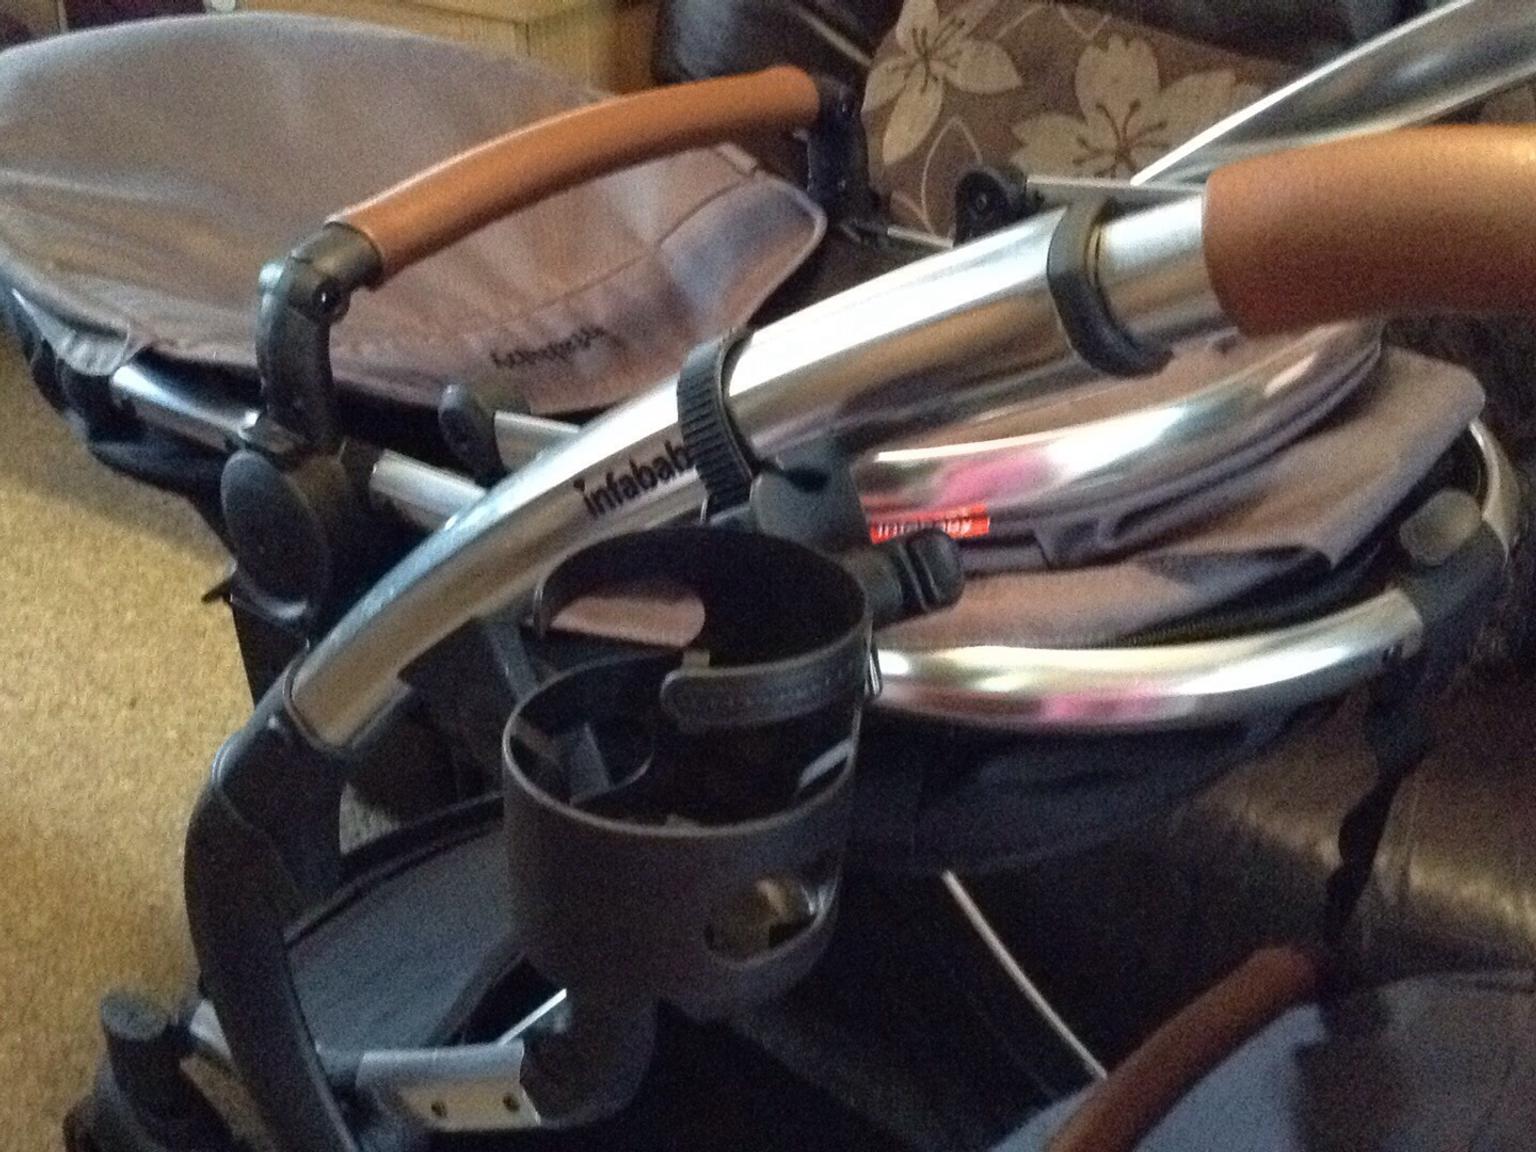 infababy double buggy